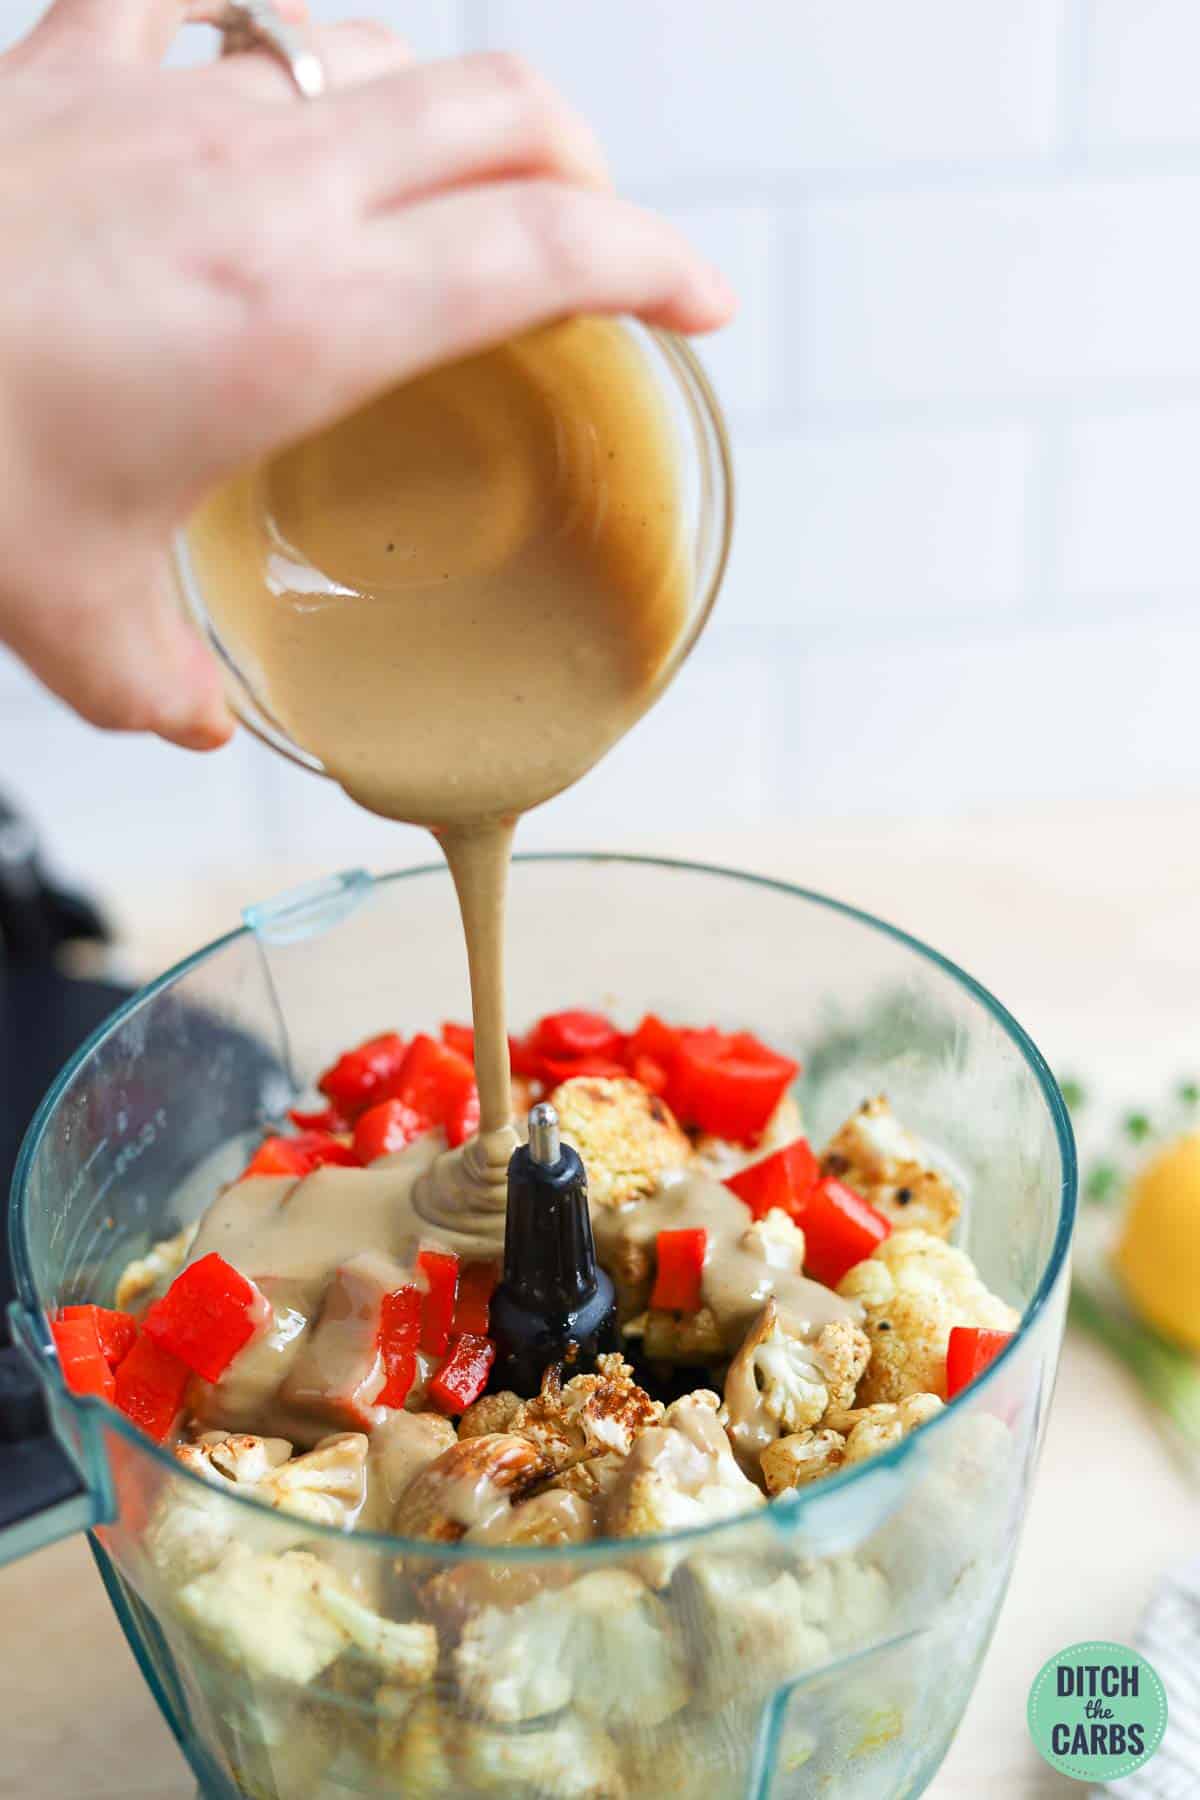 Pouring tahini over the roasted cauliflower and red peppers in the food processor.